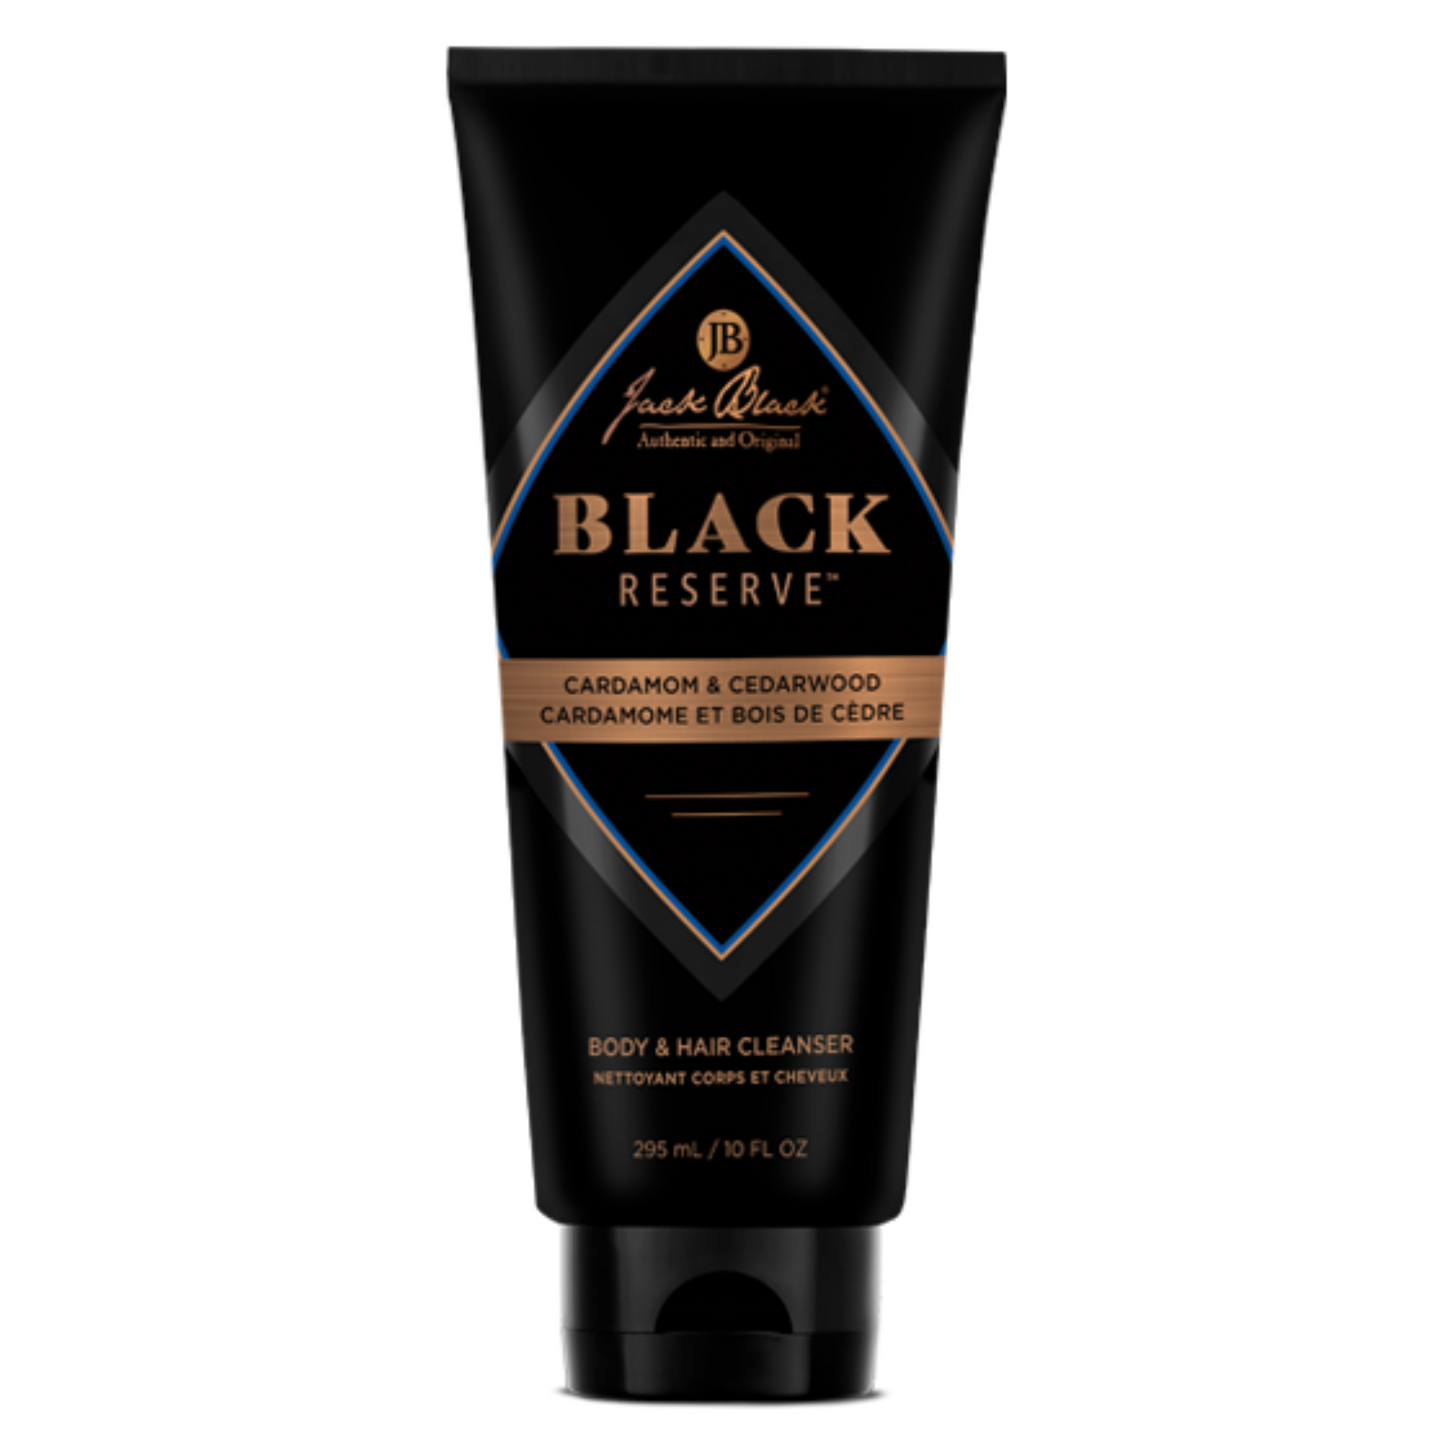 Primary Image of Black Reserve Body and Hair Cleanser